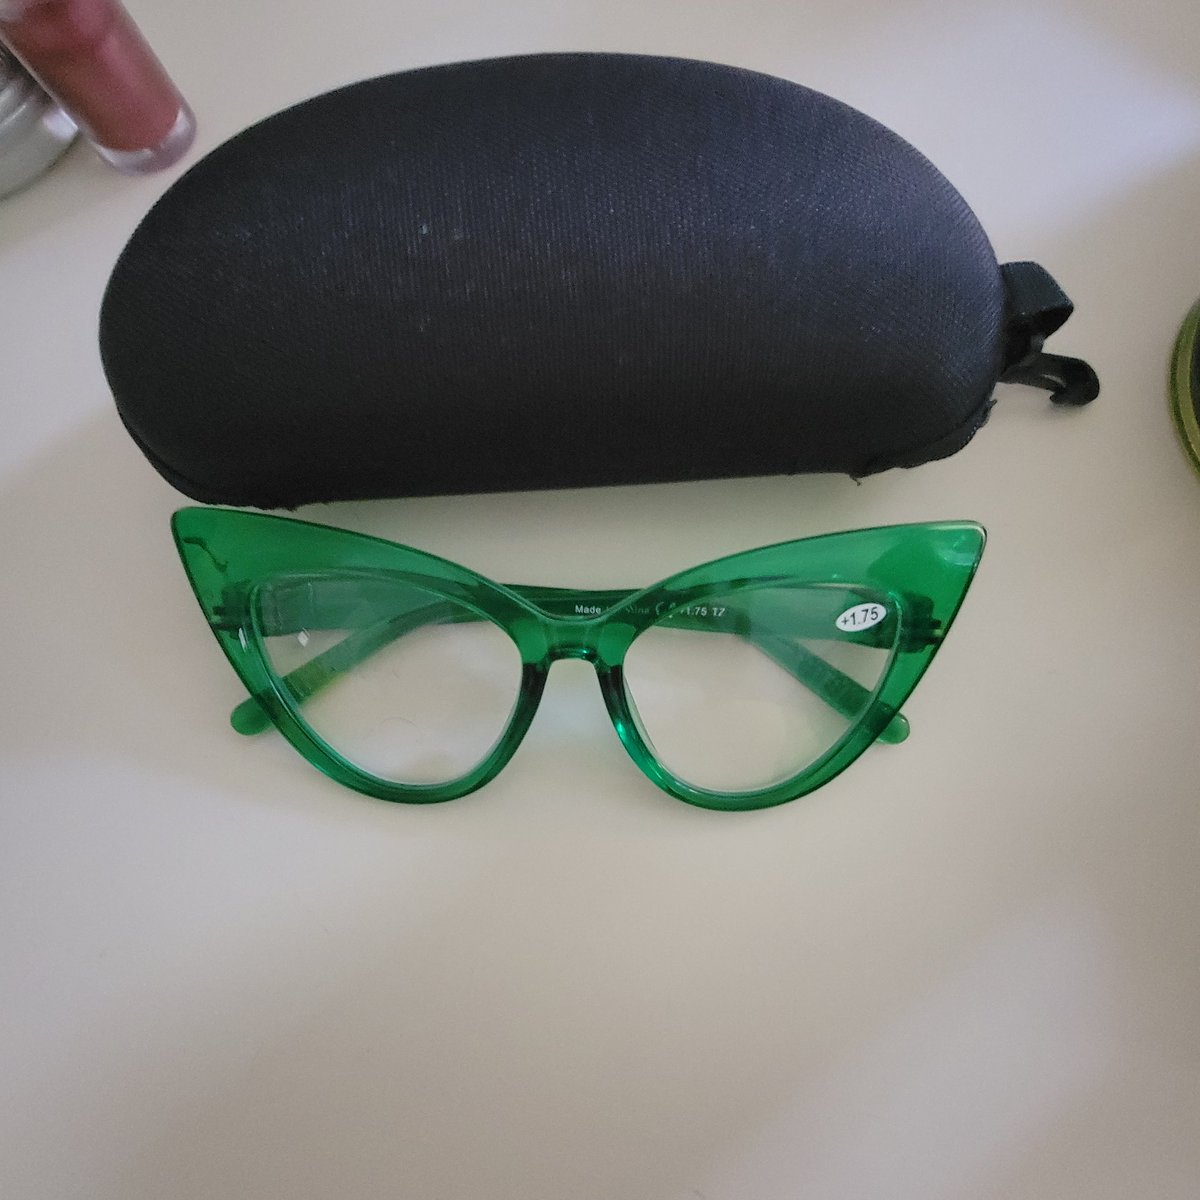 My @eyekeeperdotcom  #eyekeepers were waiting at the post office. All around, good service. I look 4ward 2 building a collection. Who says readers can't be fun? #chosda #vision #styling